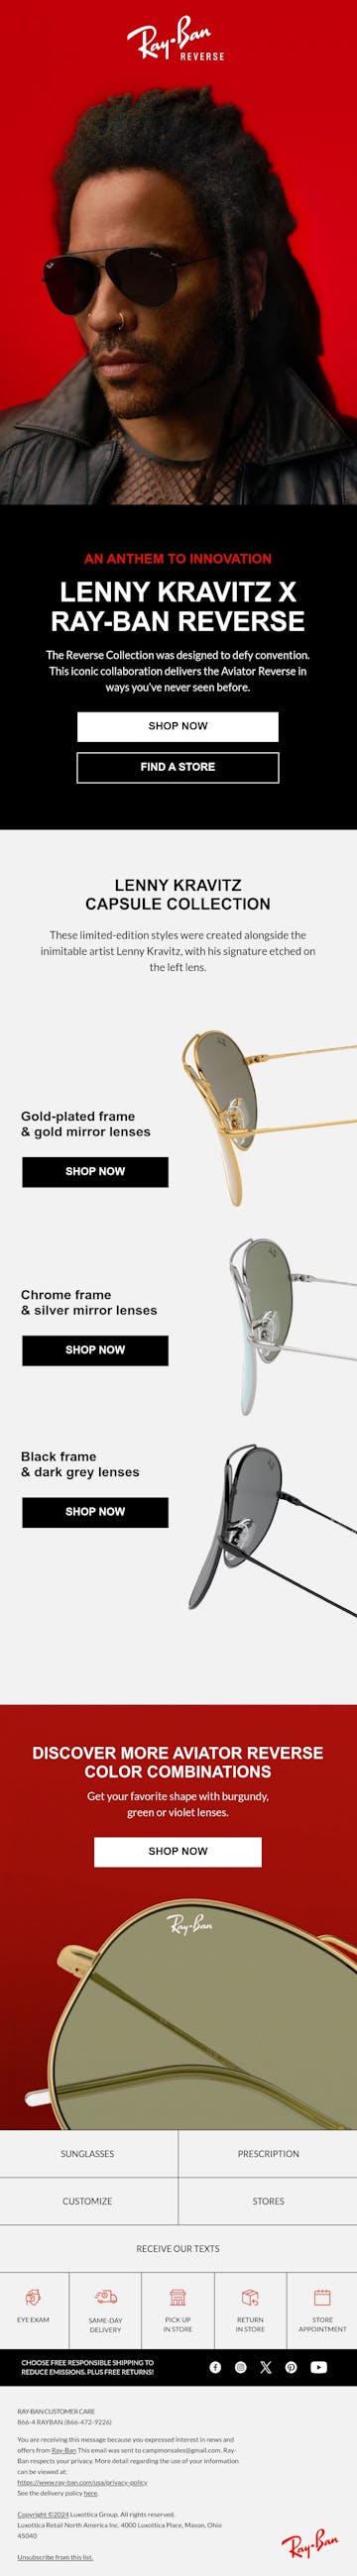 Ray-Ban Email Design Thumbnail Preview